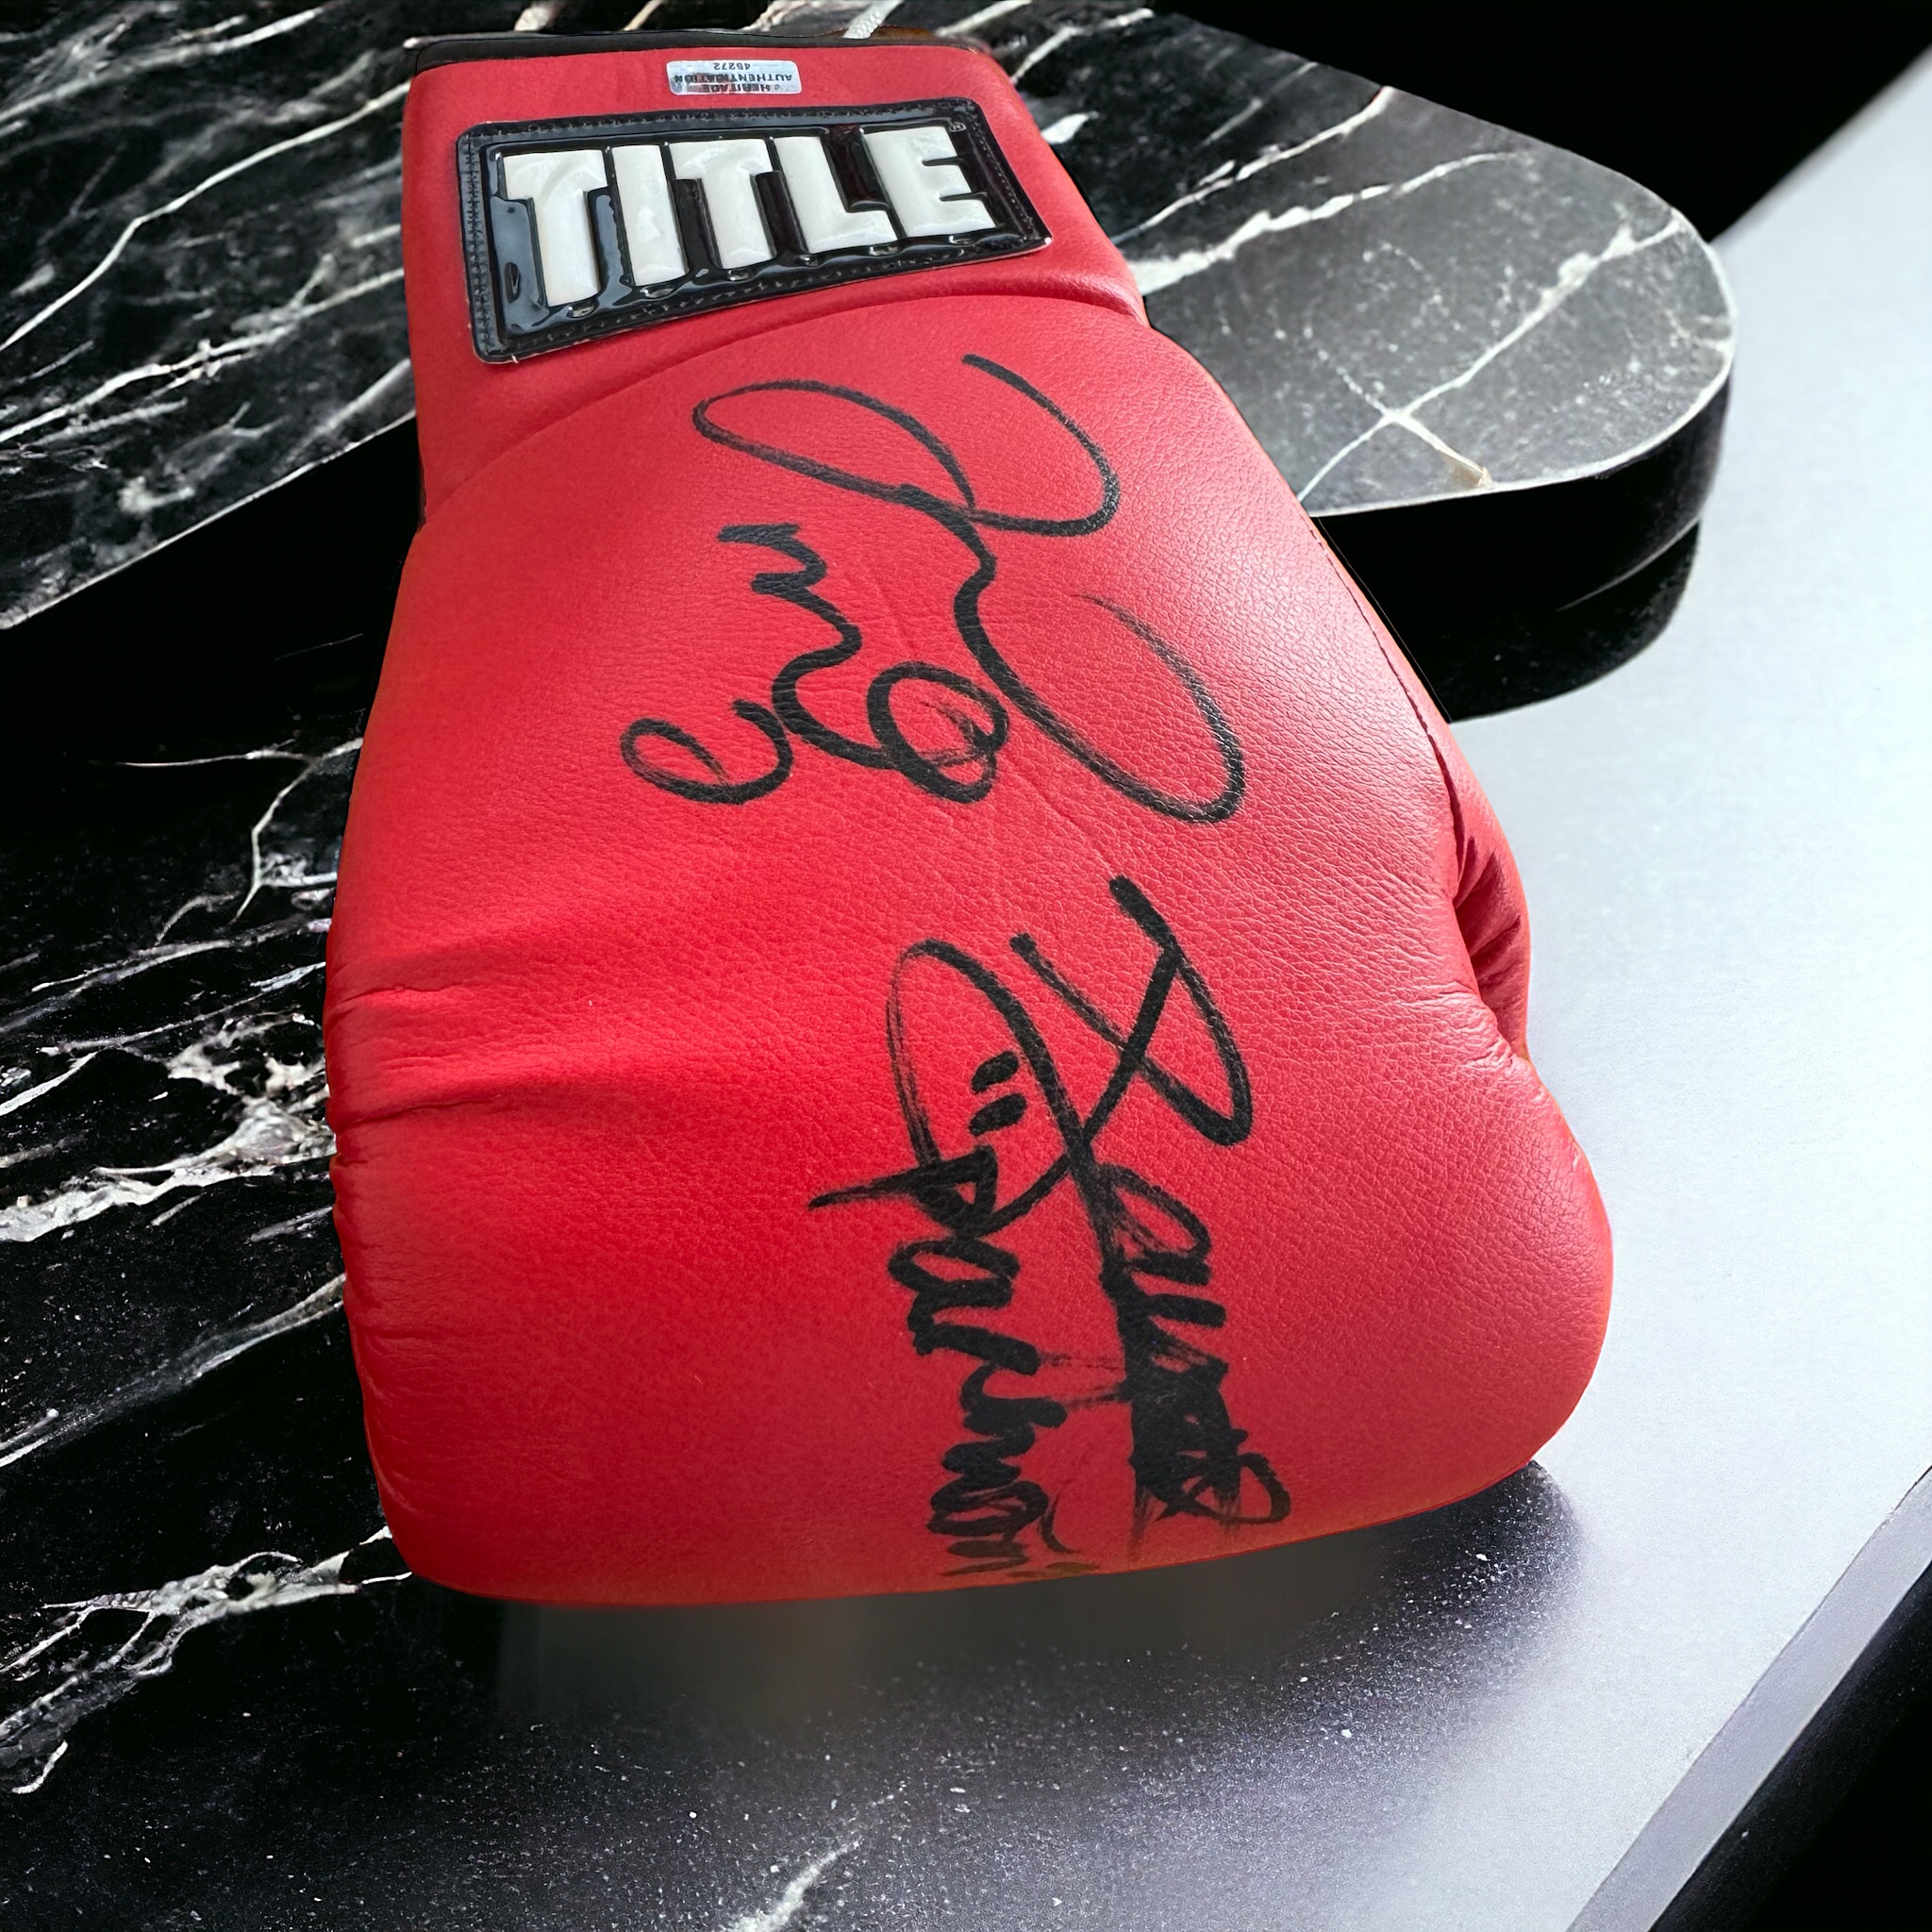 Floyd Mayweather Jr and Manny Pacquiao signed red Title boxing glove. Emmanuel Dapidran Pacquiao CLH